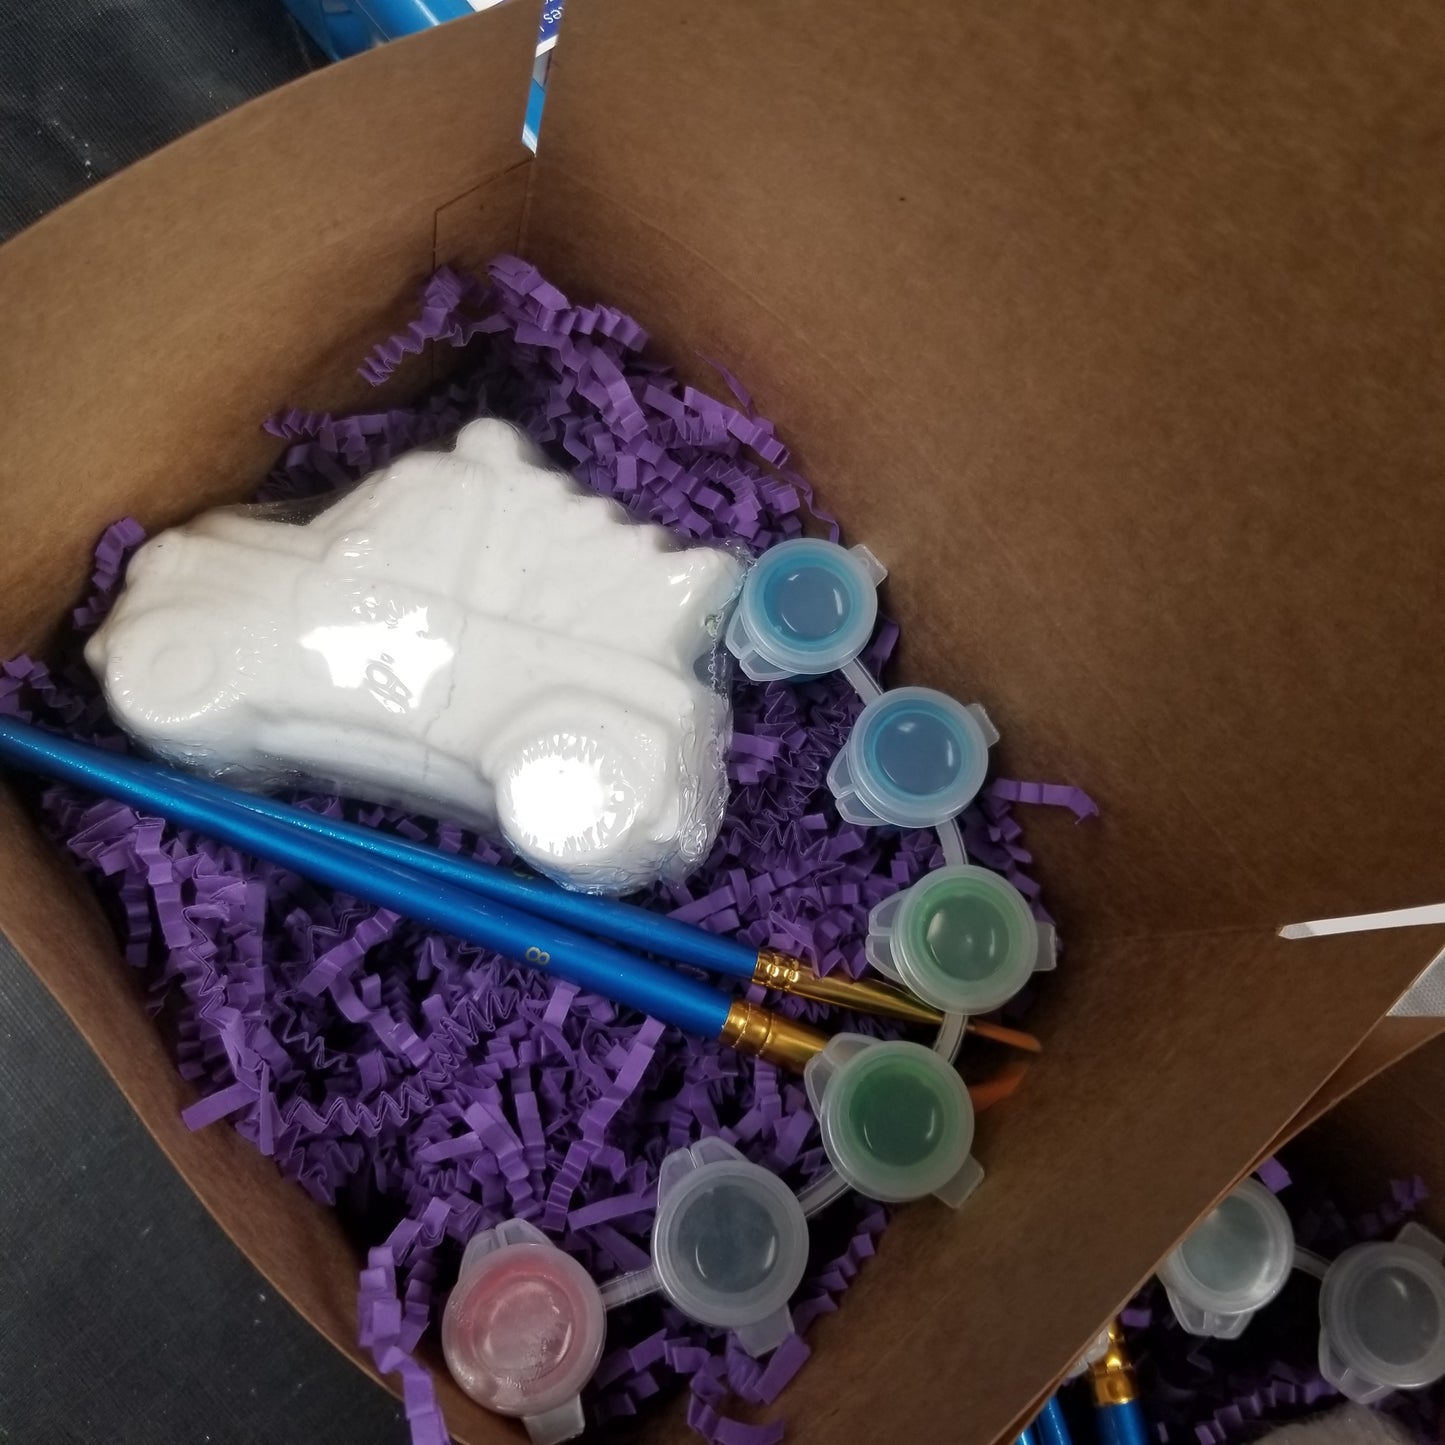 Paint your own Bath Bomb to go!